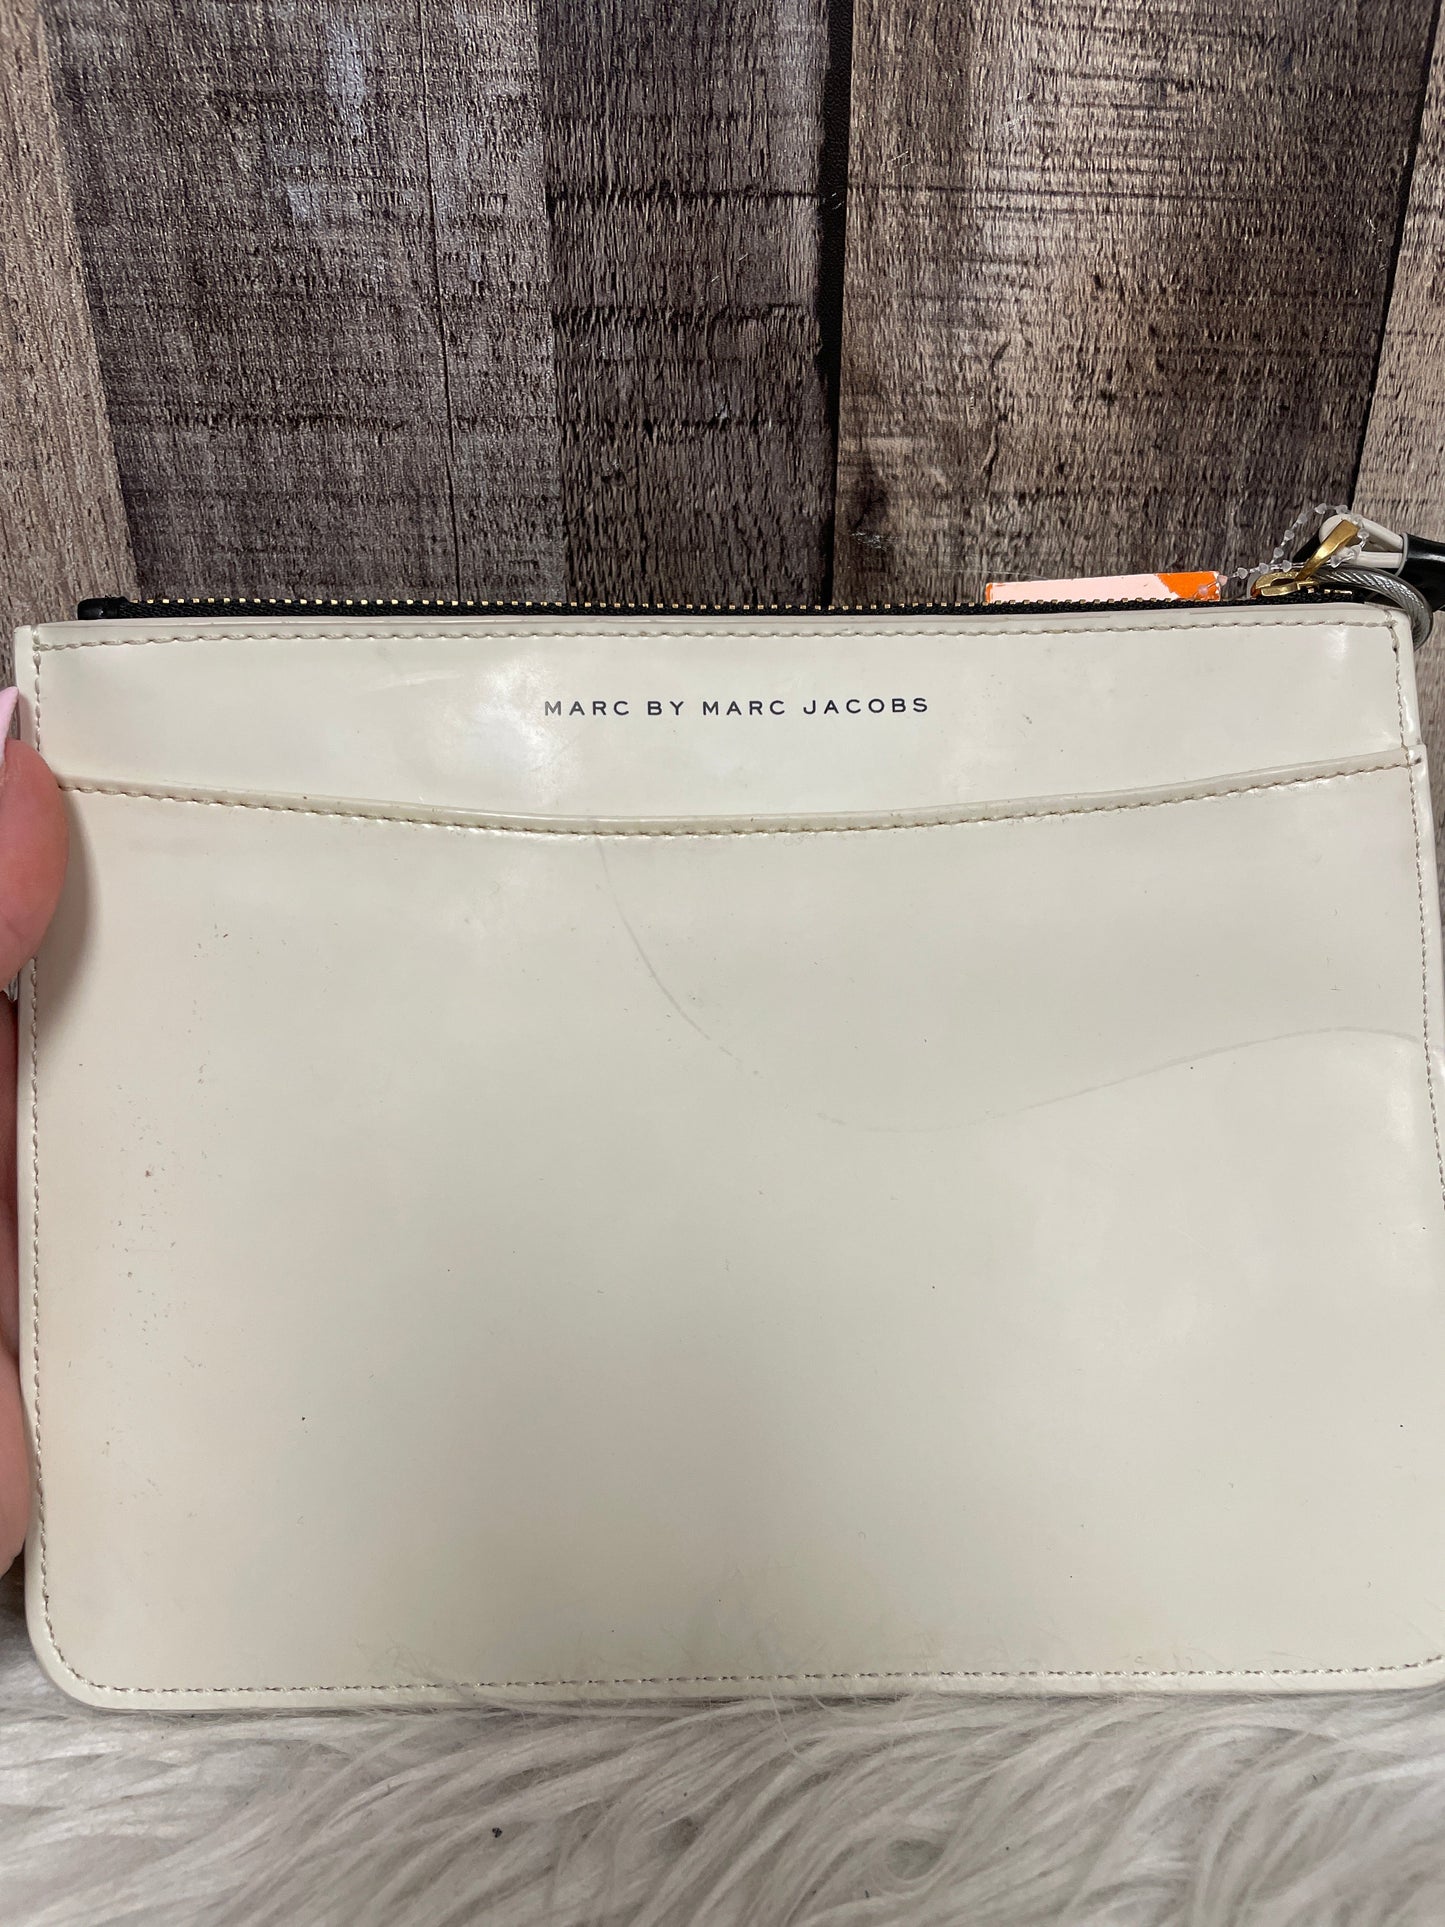 Wristlet Designer By Marc By Marc Jacobs  Size: Medium